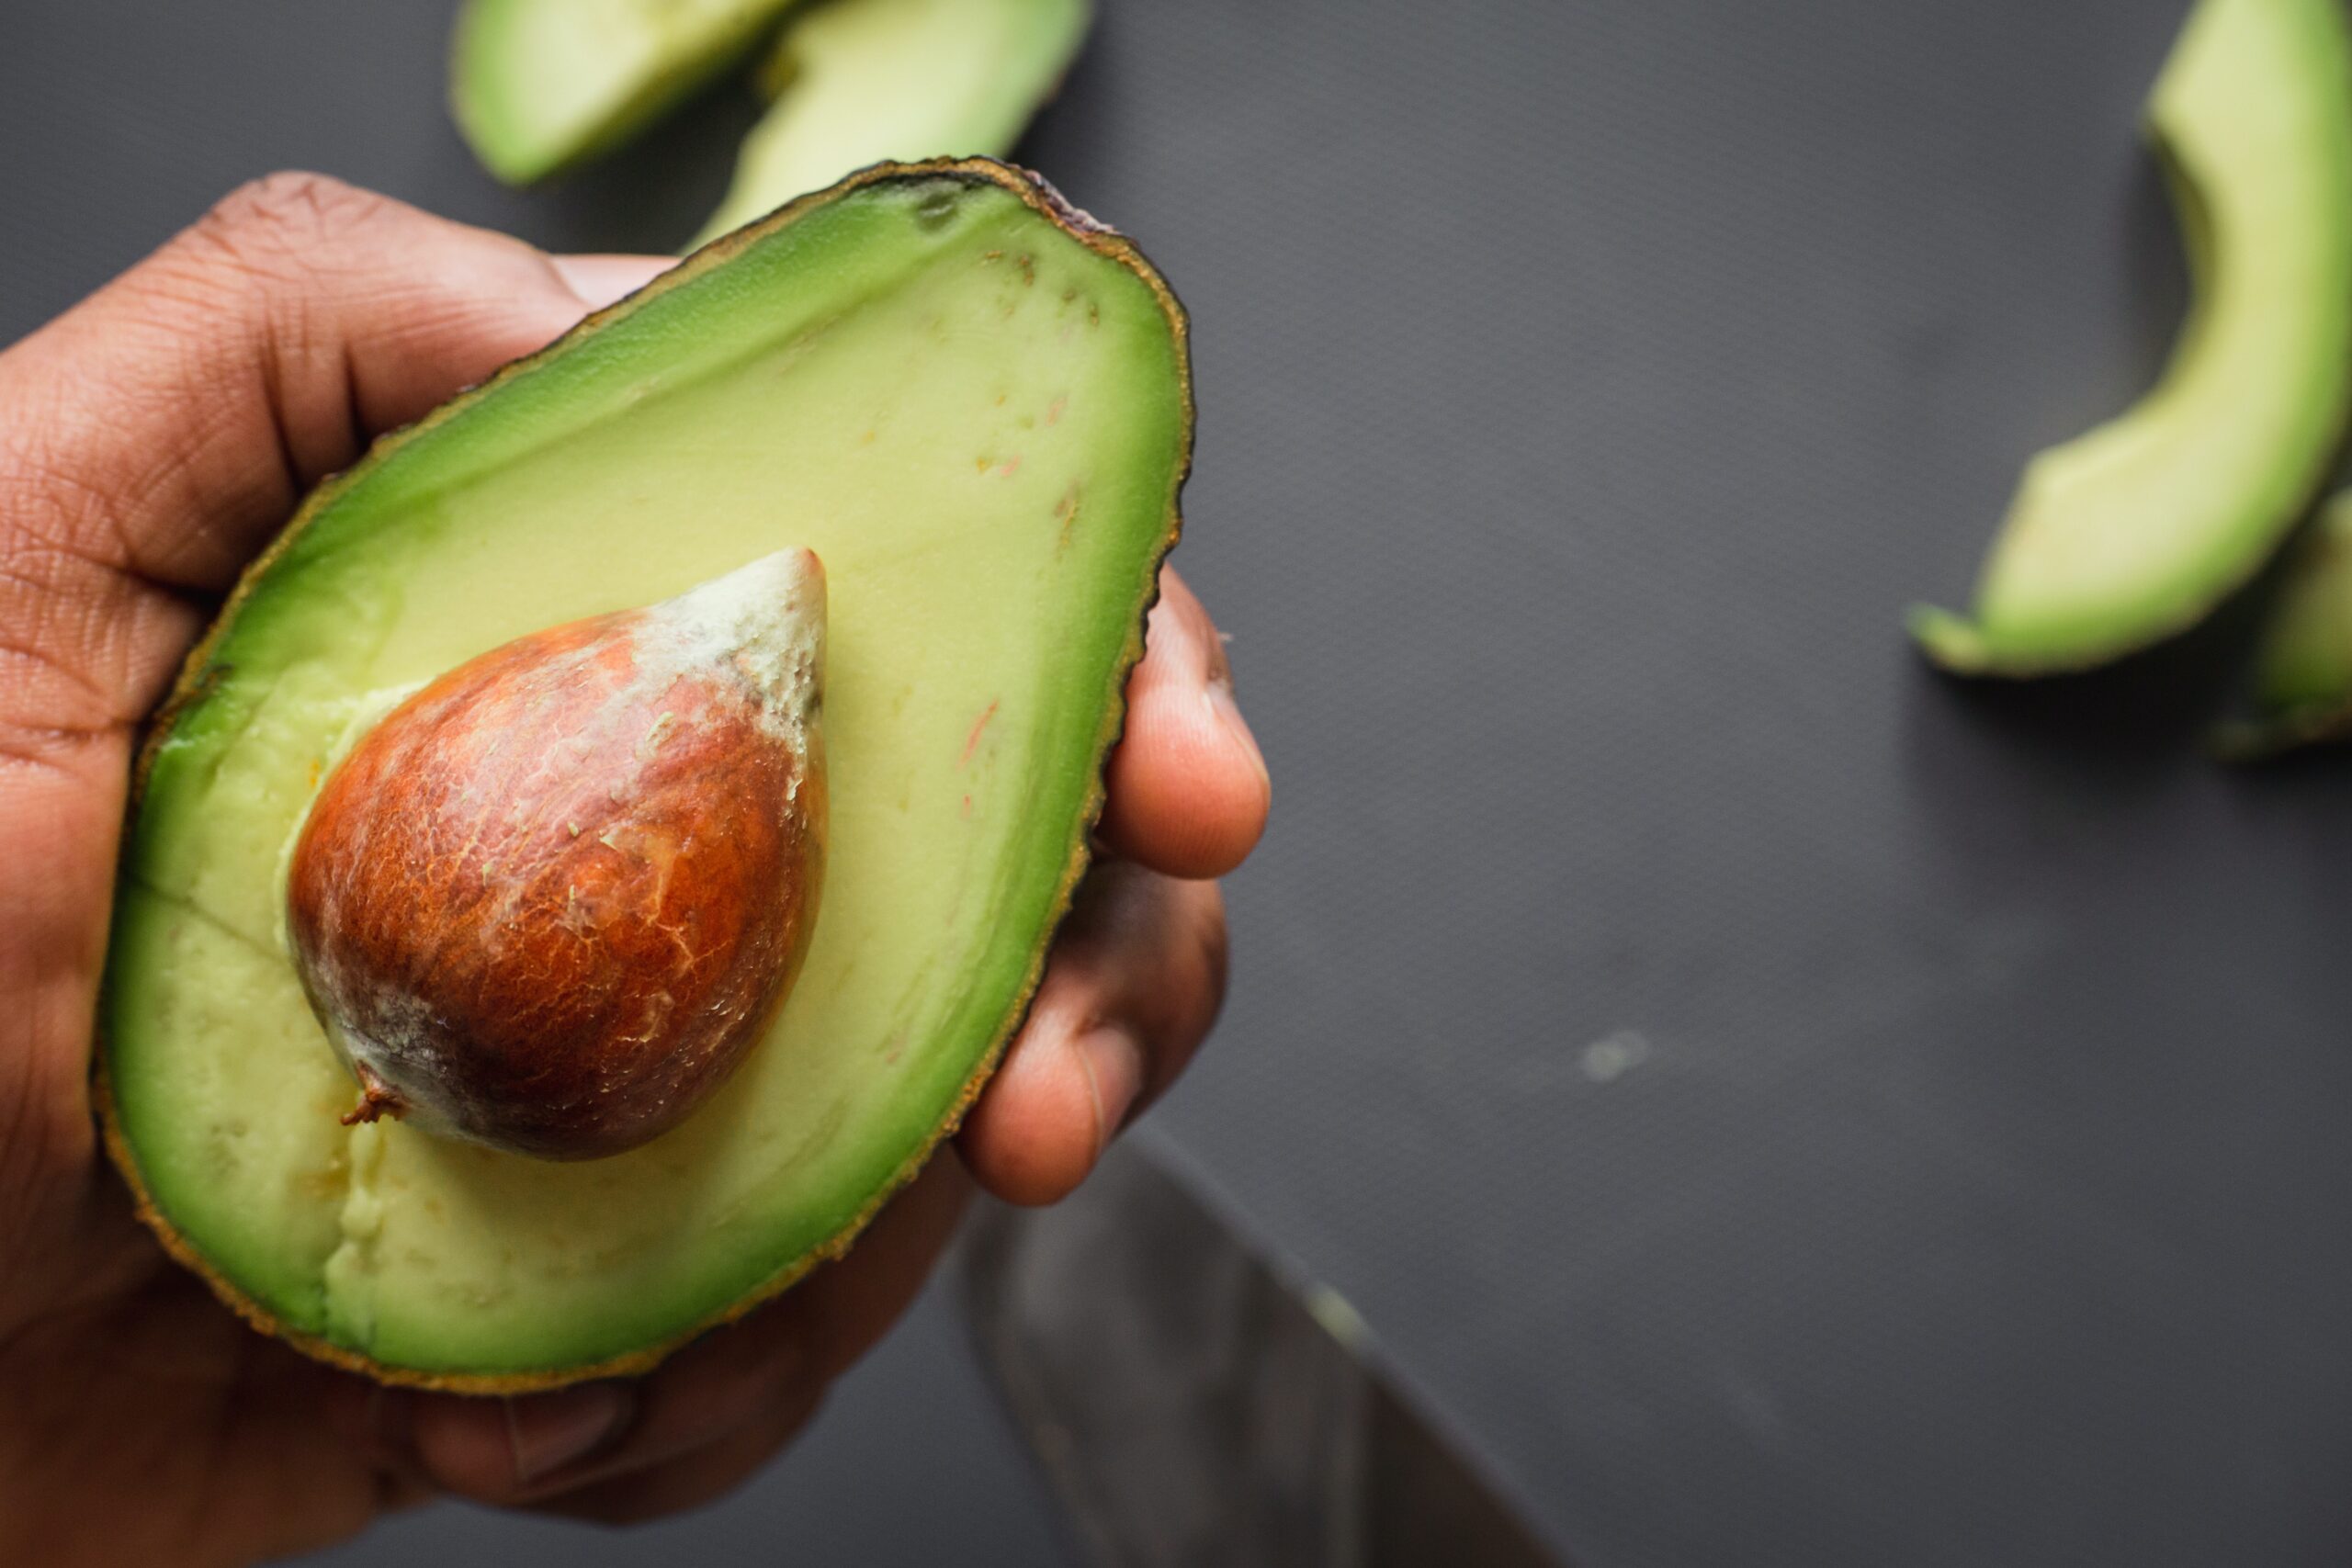 Apeel Unites Avocado Suppliers Through an Expanded Network Fighting Food Waste